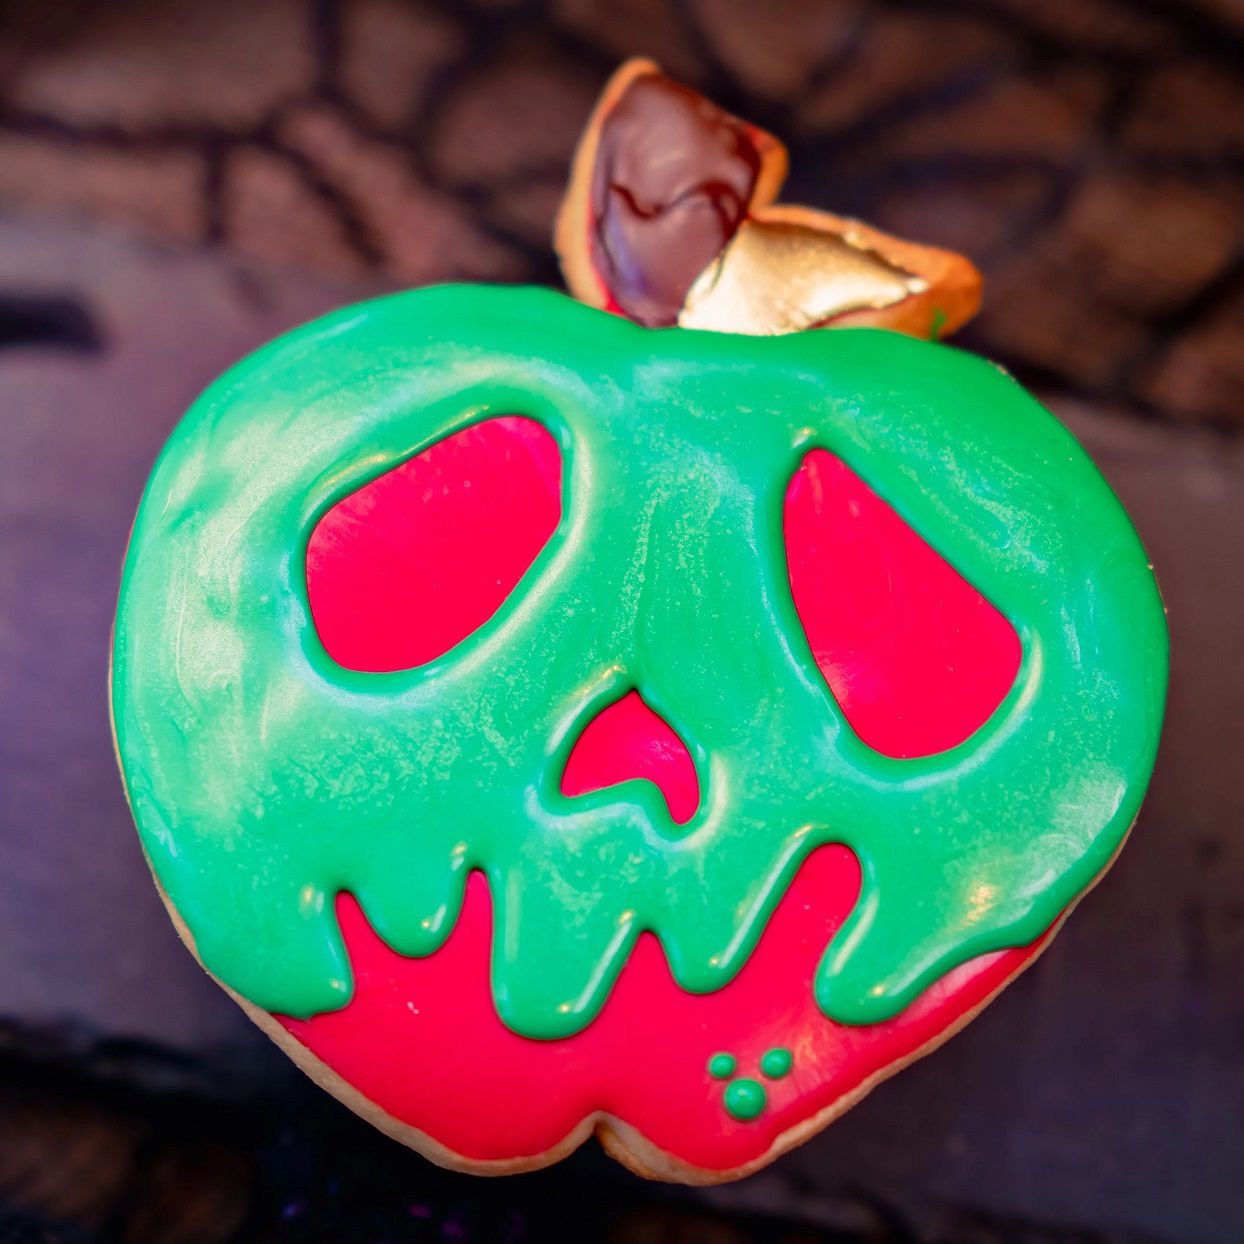 apple shaped sugar cookie decorated with green and red icing to make a scary face for a Disney Halloween treat